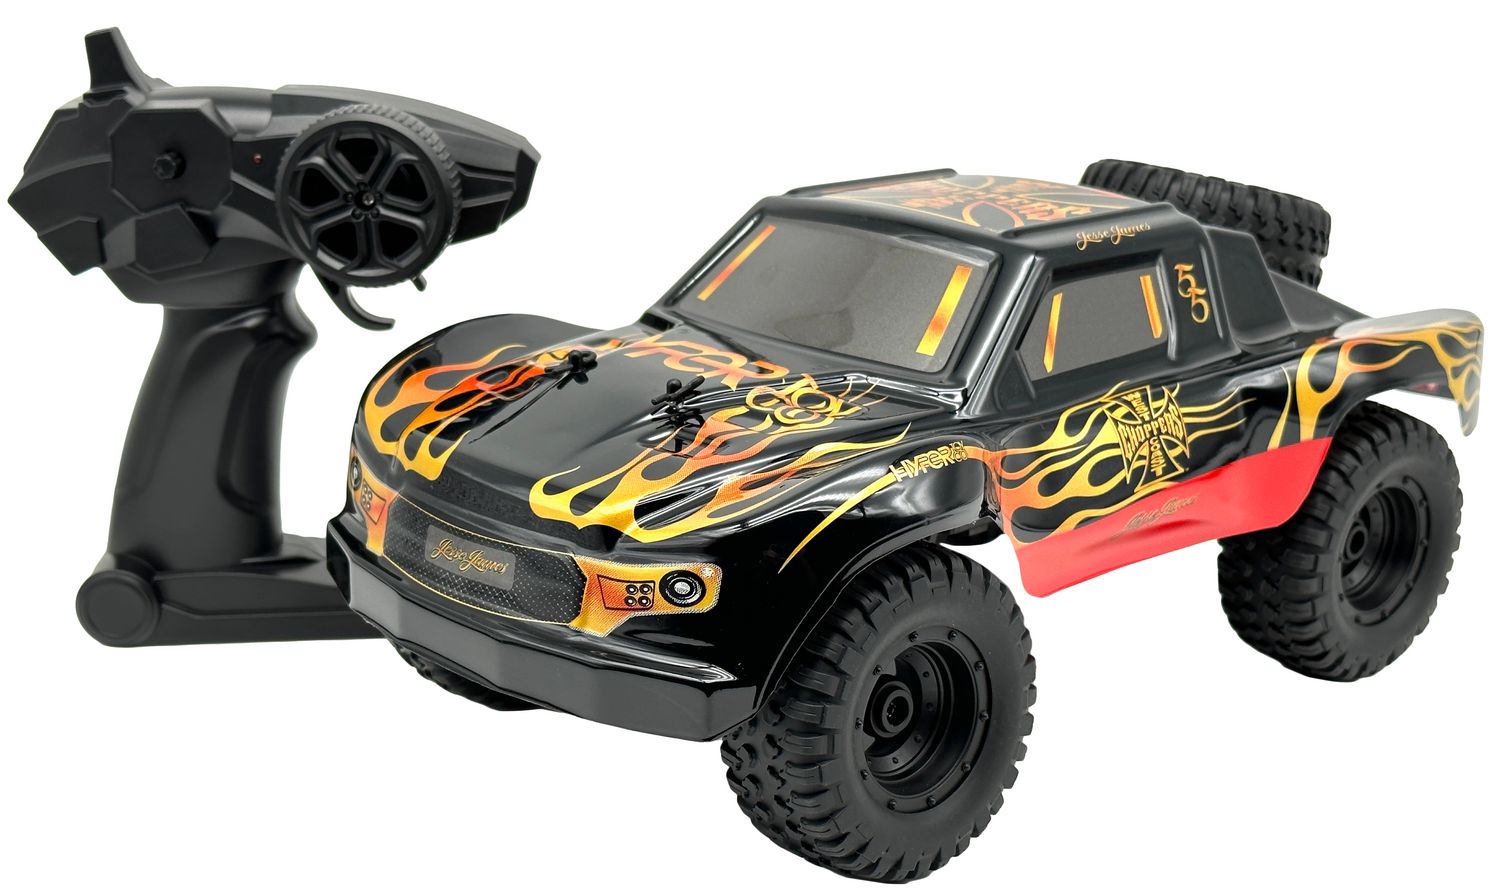 WCC Trophy Truck 1:14 Scale Remote Control Truck, 1:14 WCC TROPHY